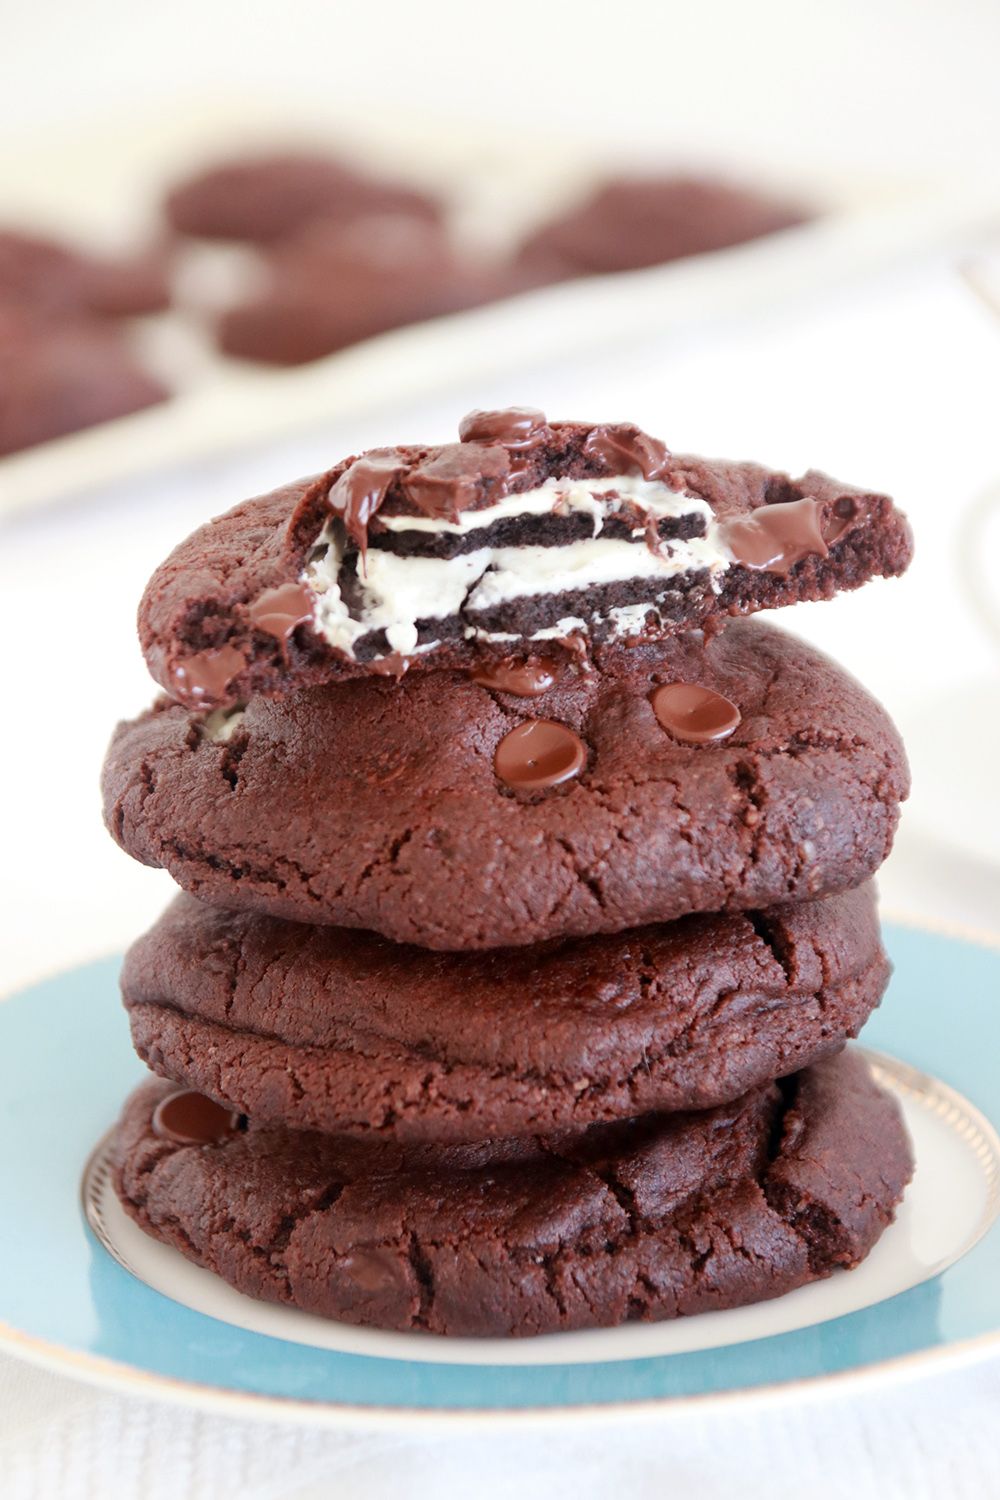 Oreo filled Chocolate Cookies | Photo: Natalie Levin